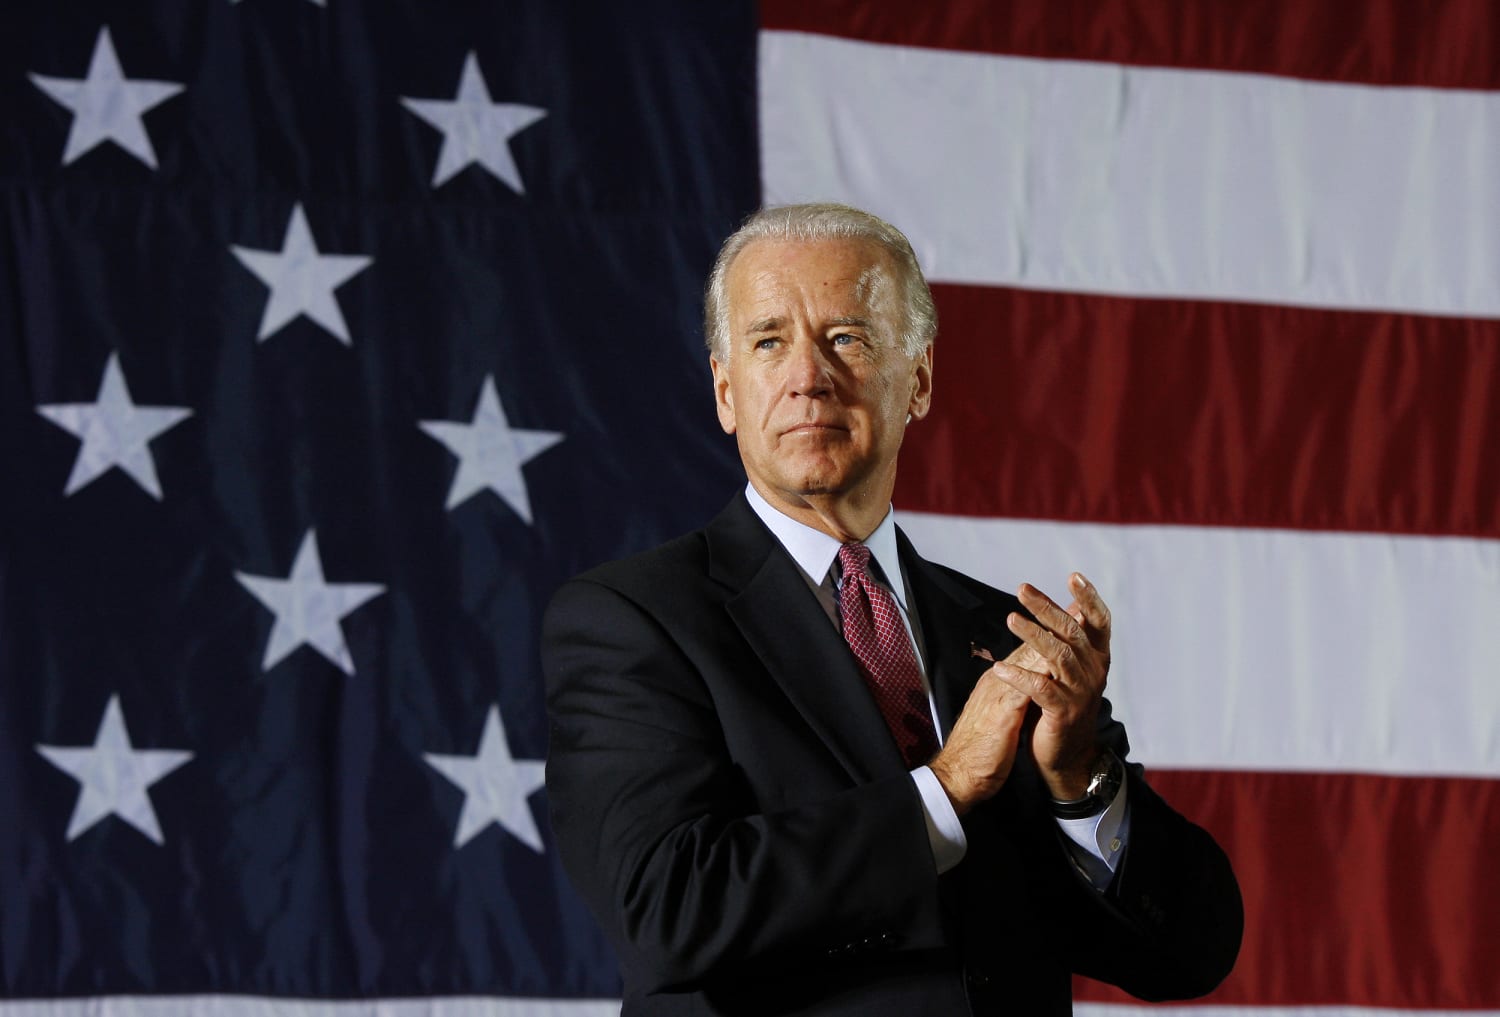 film shuffle motor Joe Biden is the Democrats' best chance to beat Trump in 2020. No other  liberal darling even comes close.